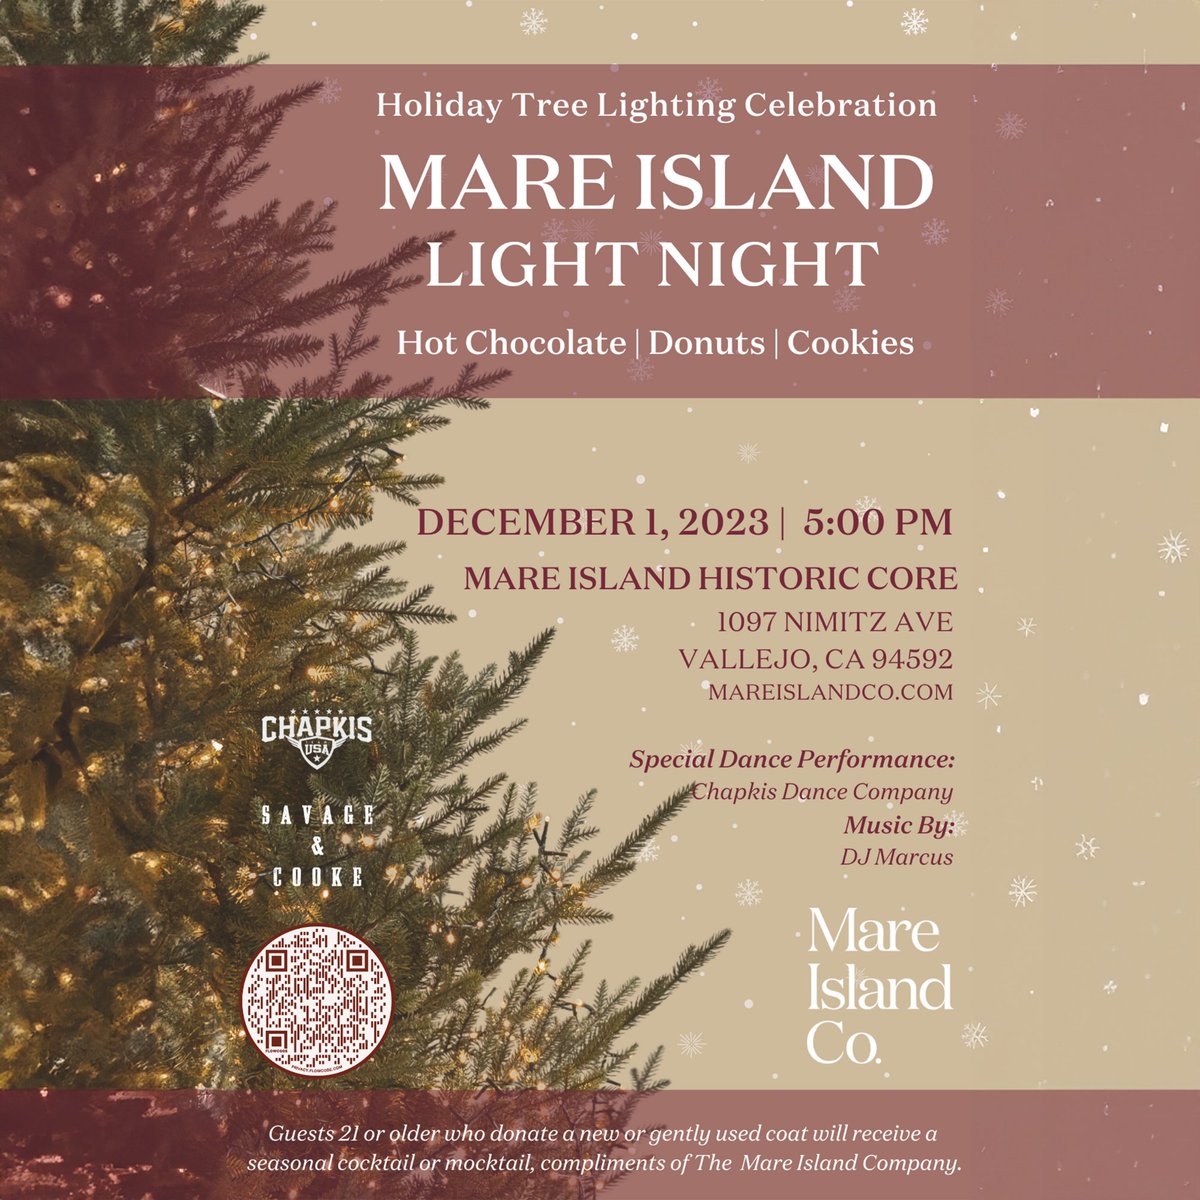 Join us under the twinkling lights at Mare Island Historic Core for a magical Holiday Tree Lighting Celebration on December 1, 2023. Let the festive spirit illuminate the historic surroundings at 1097 Nimitz Ave, Vallejo, CA 94592.